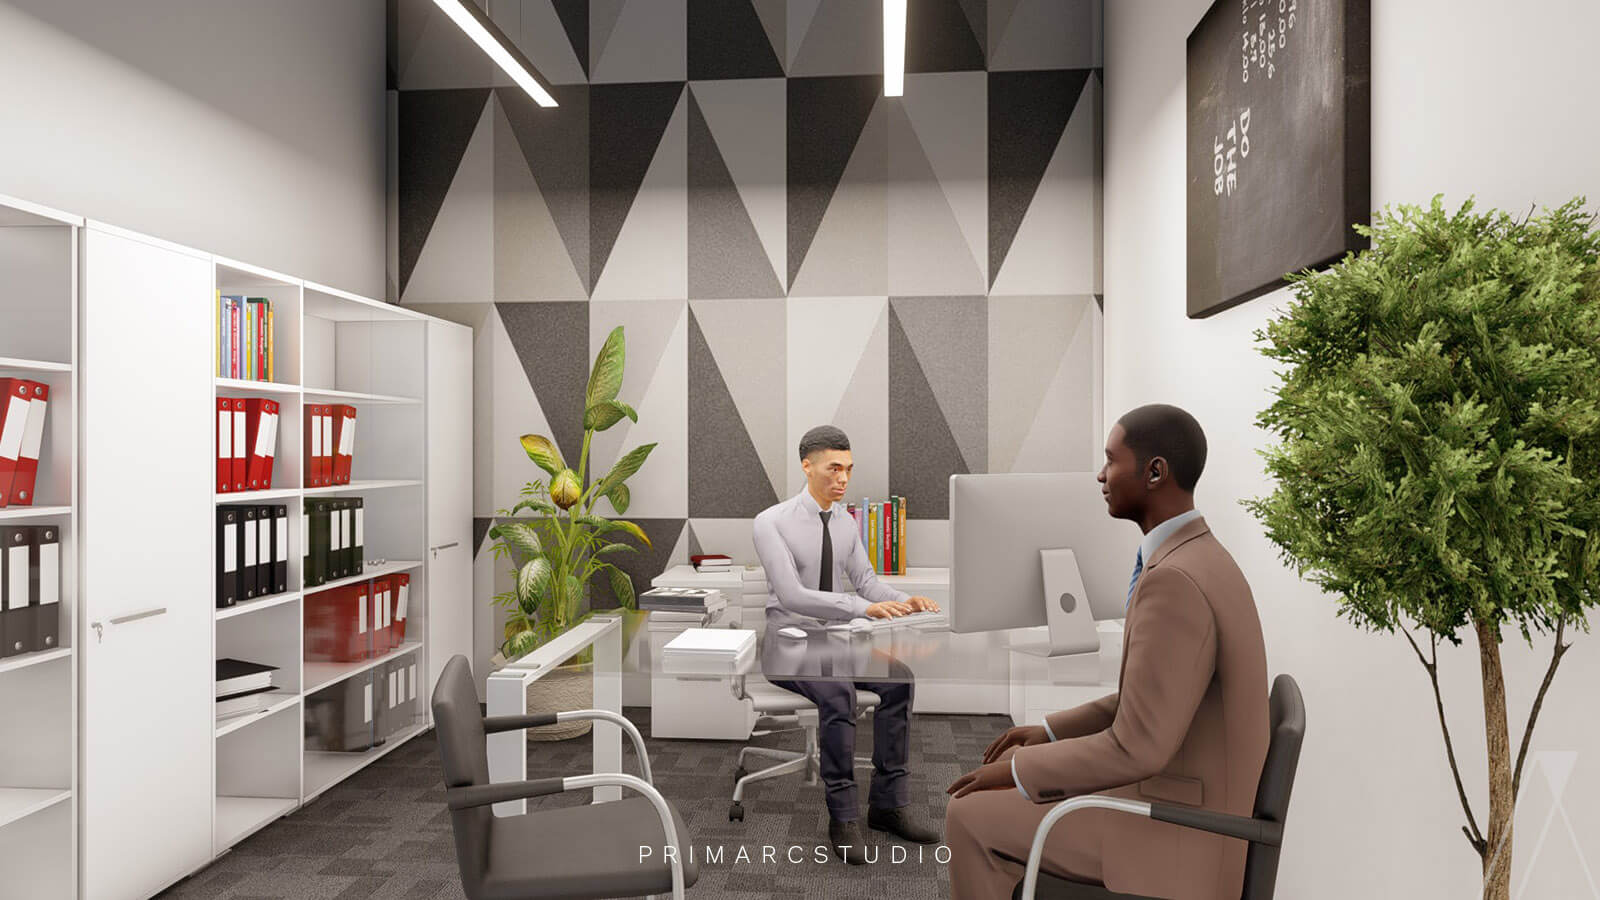 Office manager office design with geometric pattern on wall